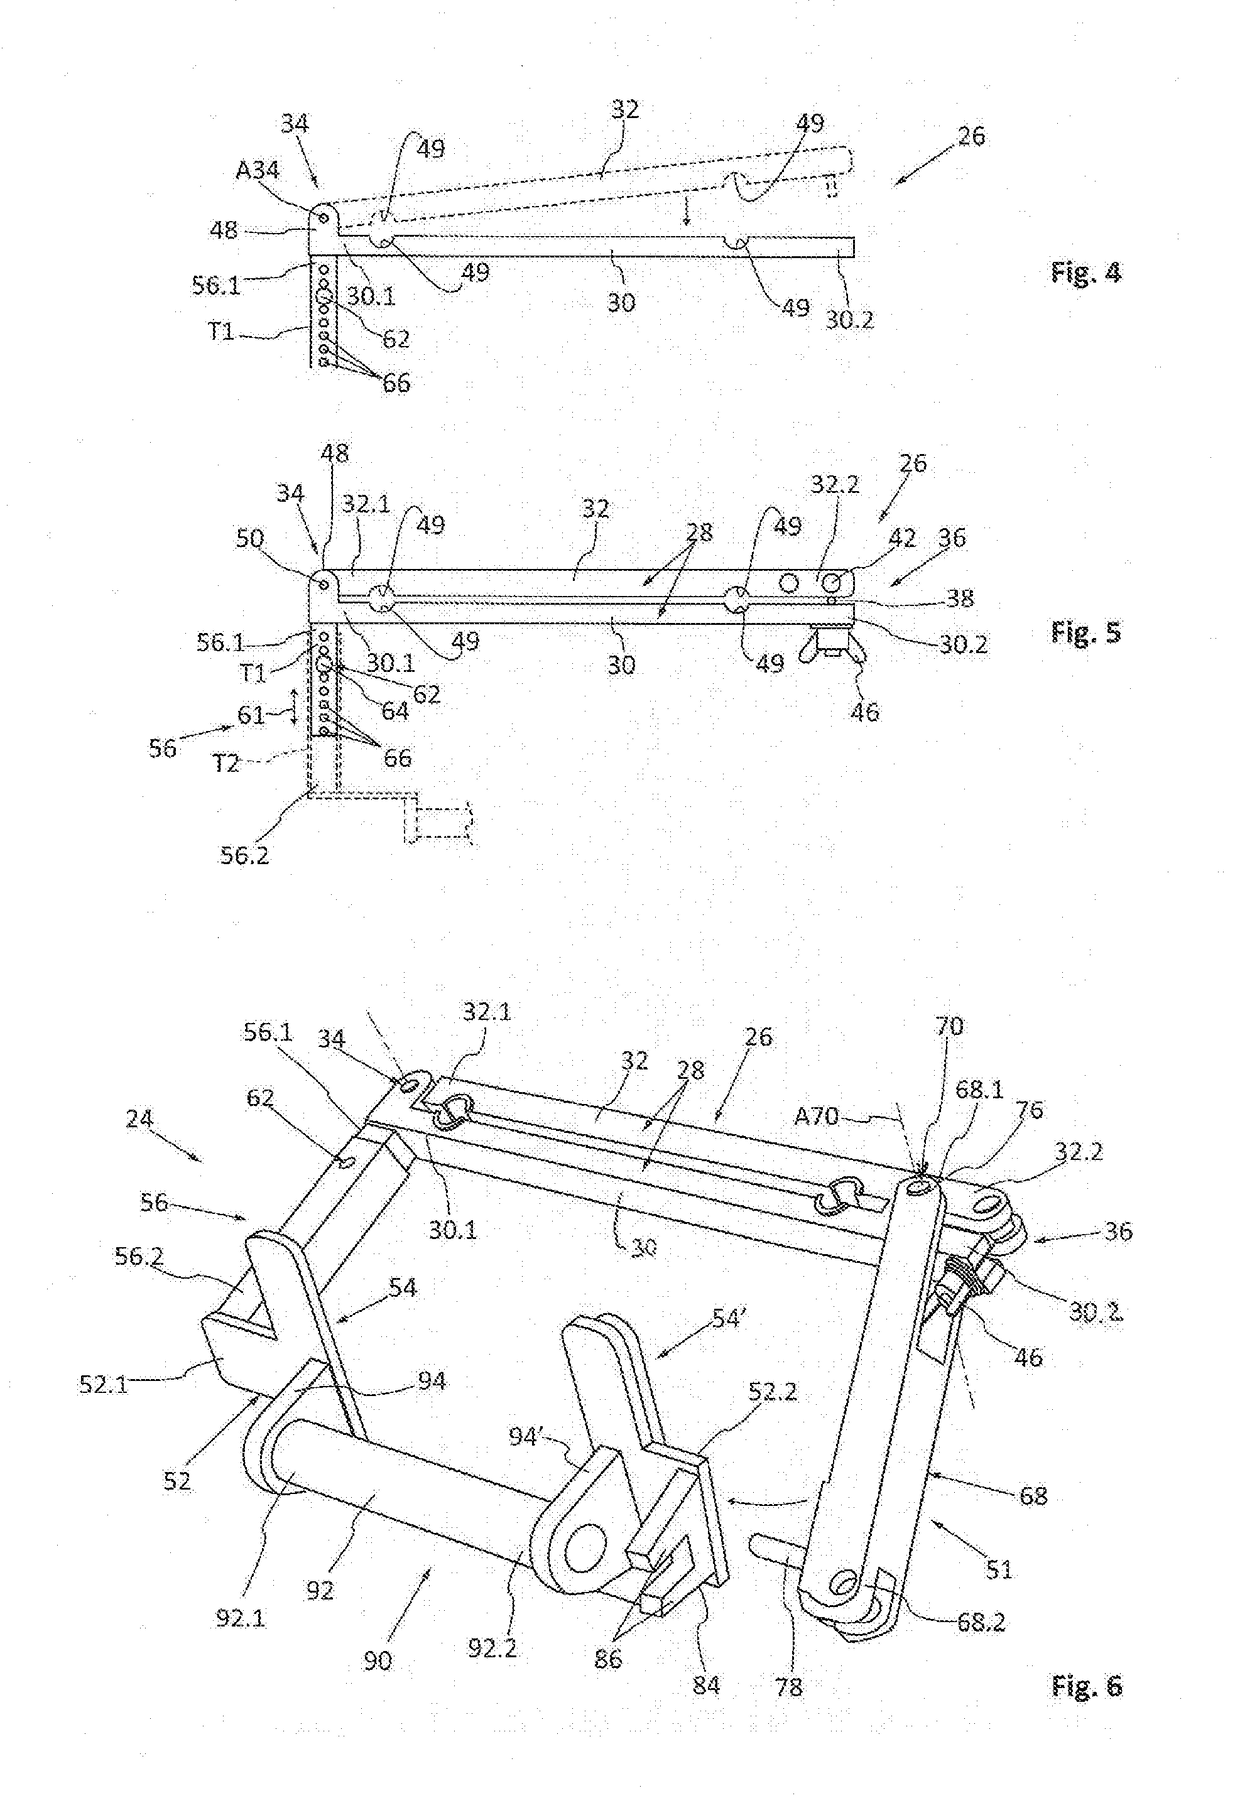 Screen support configured for attachment to a backrest of a seat